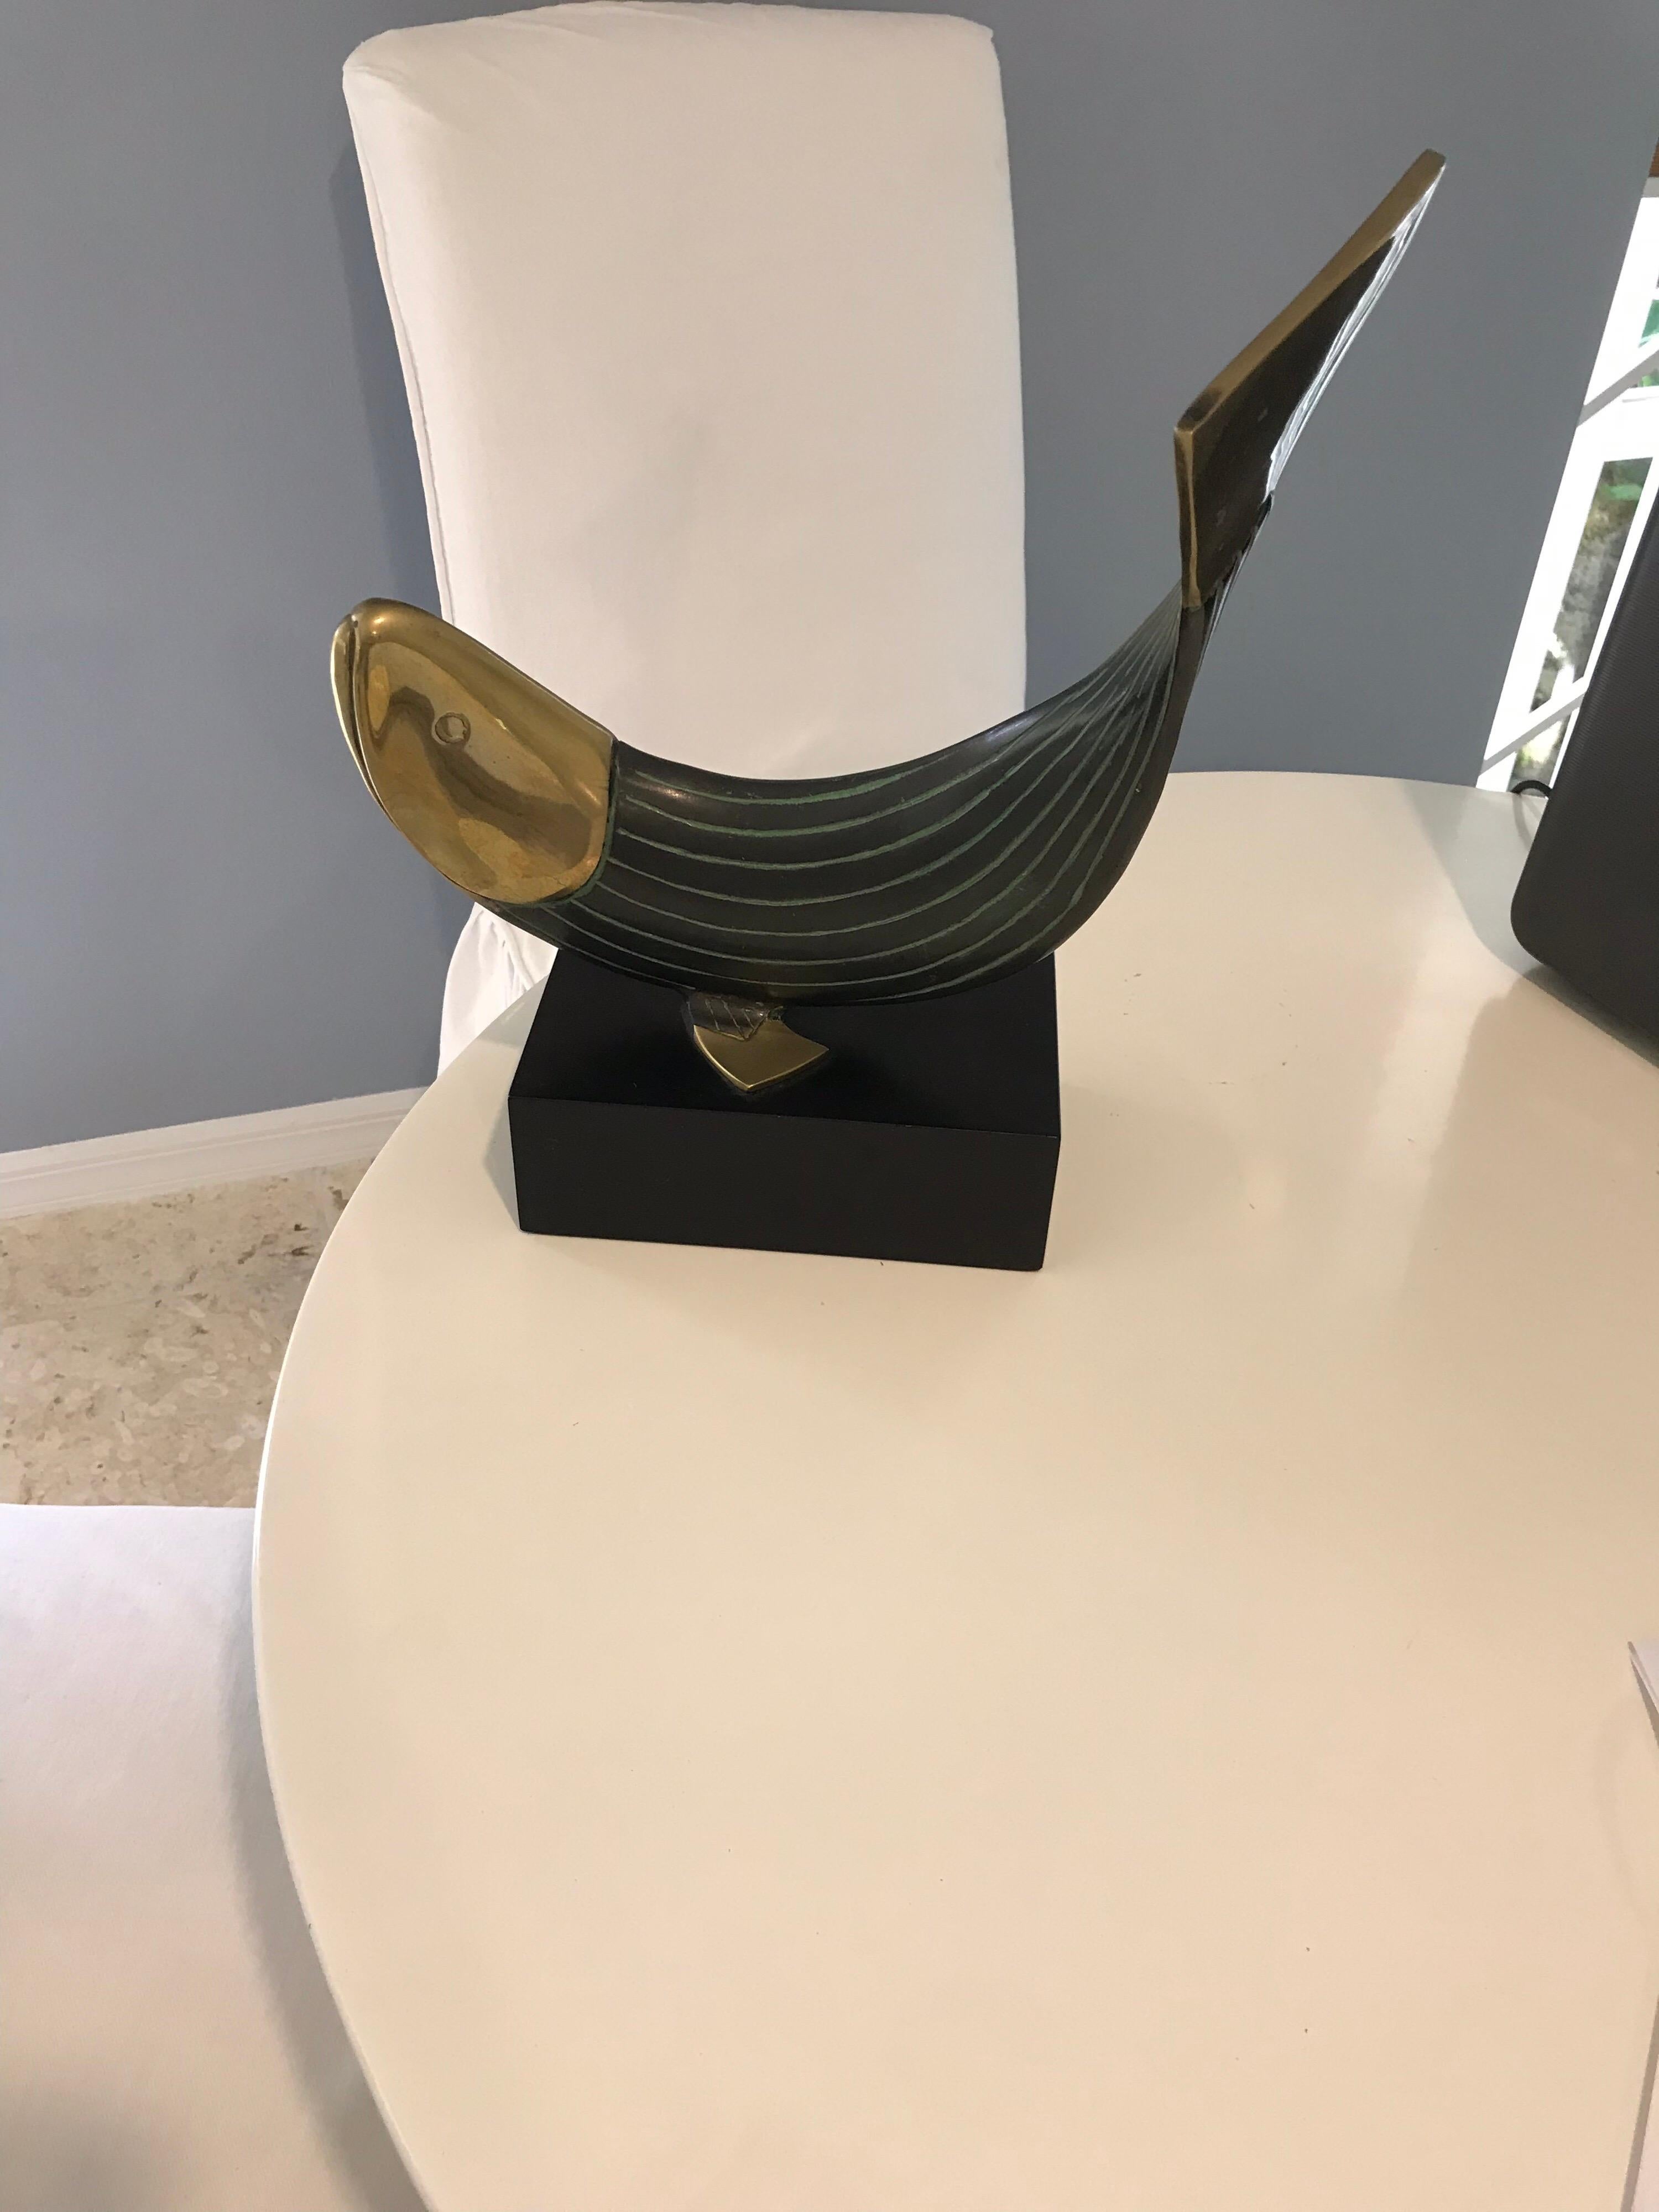 This is a modern brass and metal fish statue mounted on a metal Stand made by Dolbi Cashier in 1990.